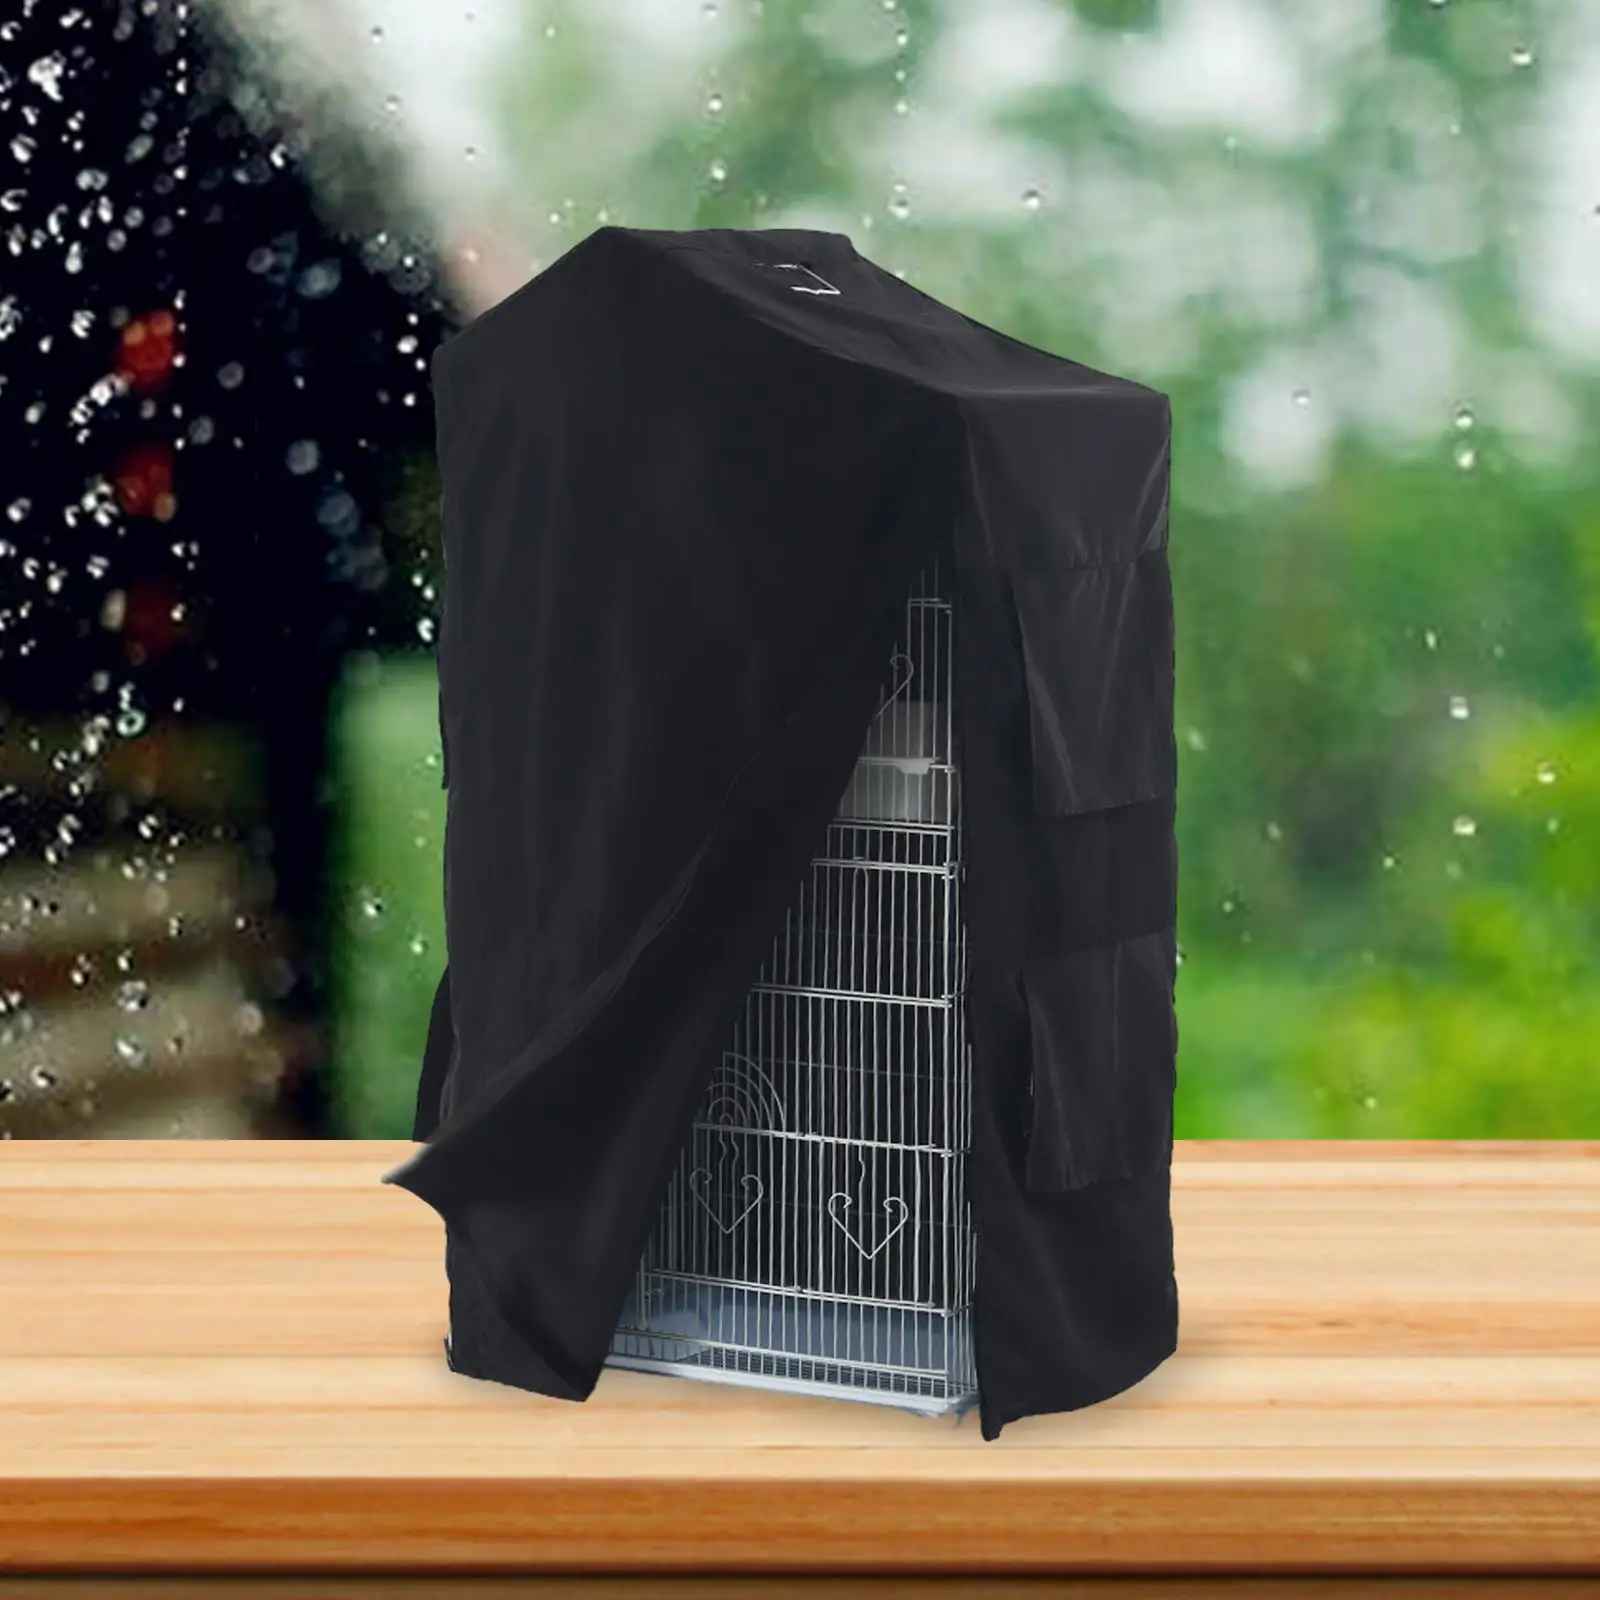 Bird Cage Cover Sunproof Bird Parrot Cage Cover Washable Good Night Windproof for Parakeets Parrot Budgies Bird Supplies